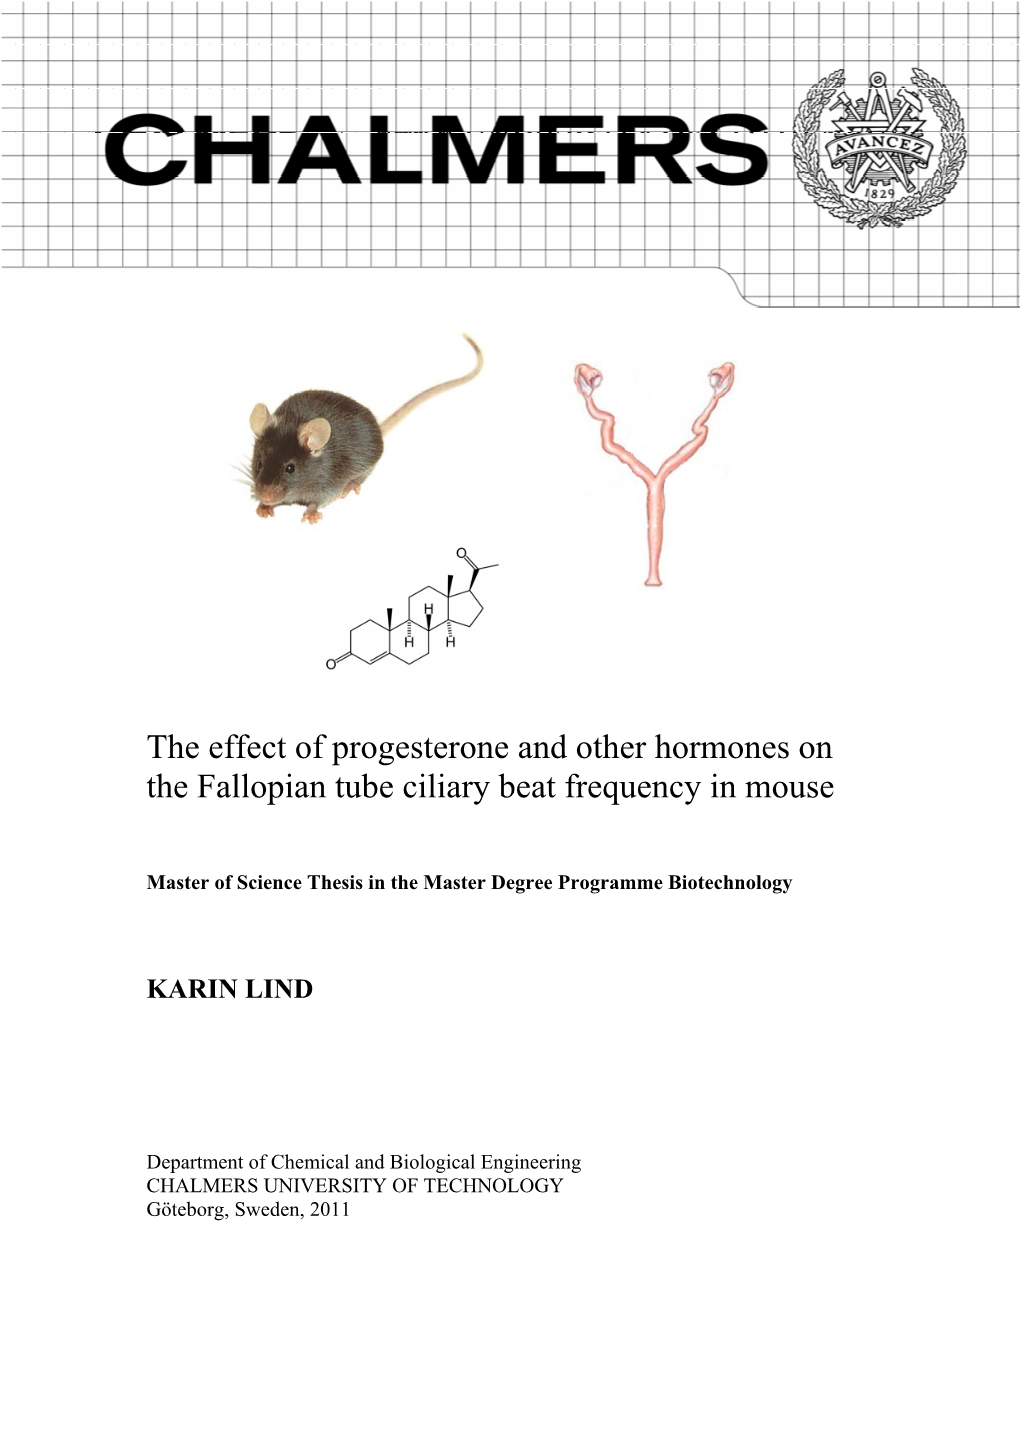 The Effect of Progesterone and Other Hormones on the Fallopian Tube Ciliary Beat Frequency in Mouse